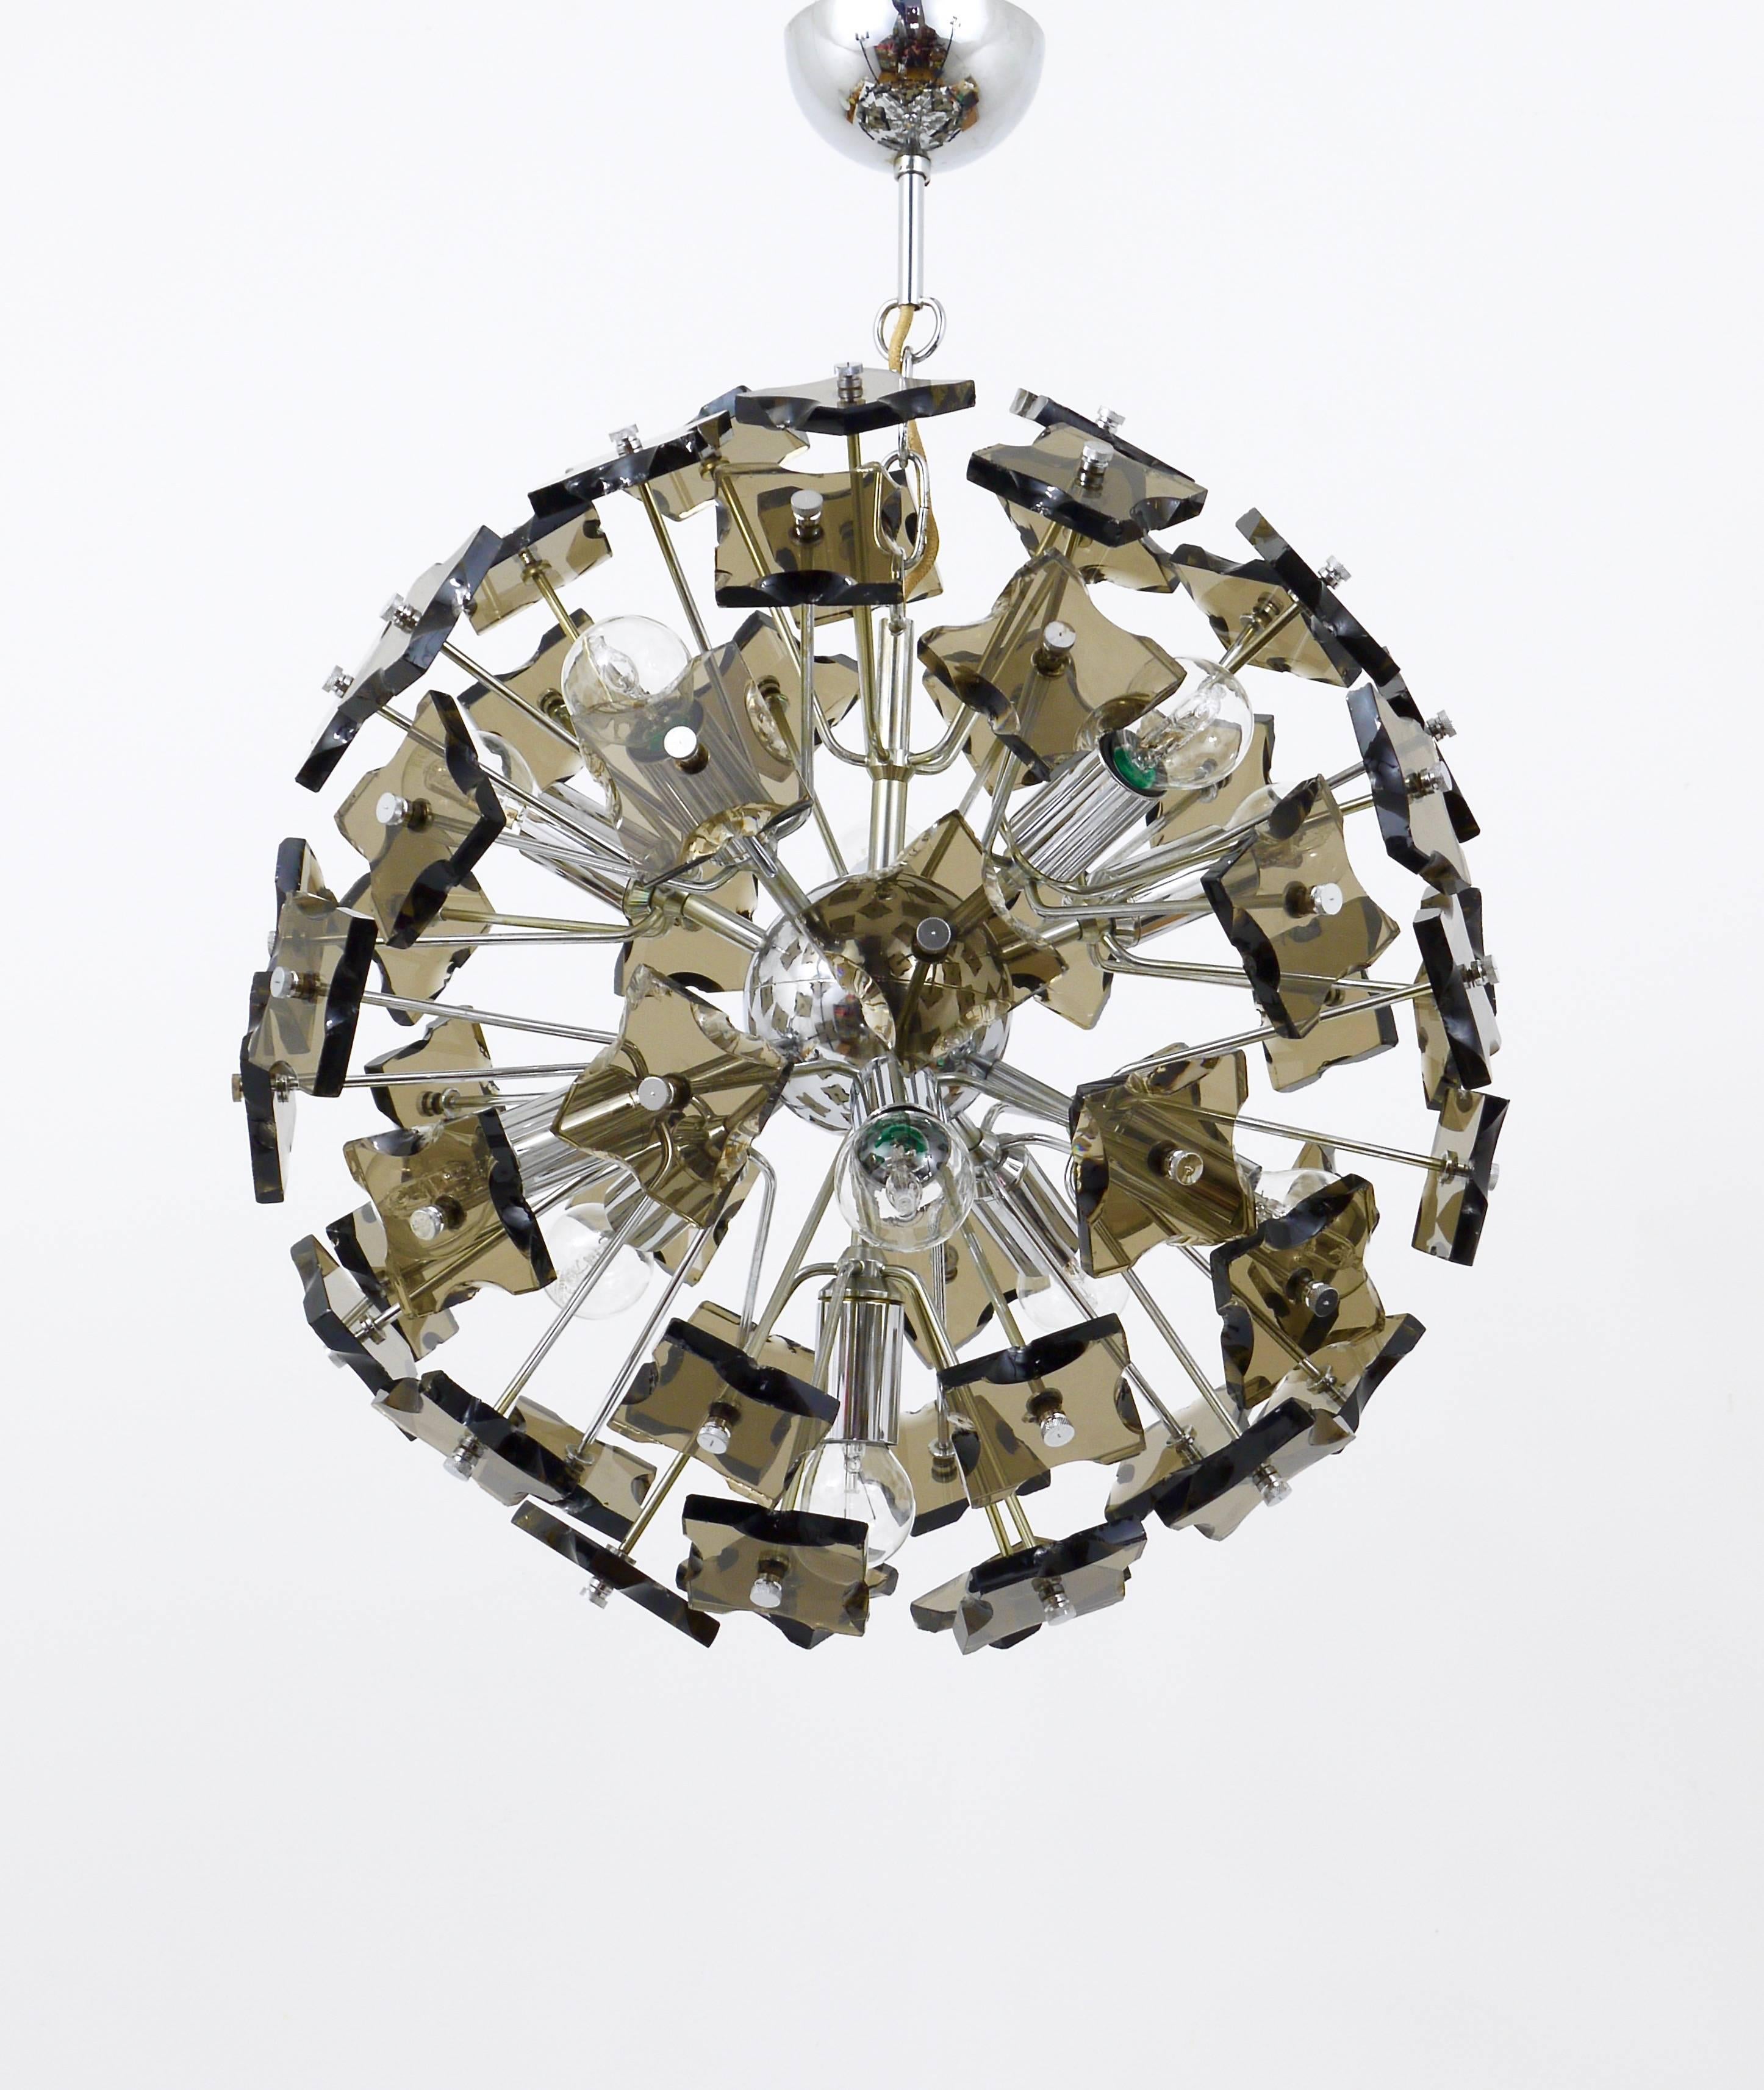 A beautiful and impressive Italian Sputnik chandelier vintage pendant light from the 1960s. 60 thick and solid hand-chipped smoked cut glass elements on a chrome-plated hardware. 11 light sources, 19 inches diameter. In very good condition. In the